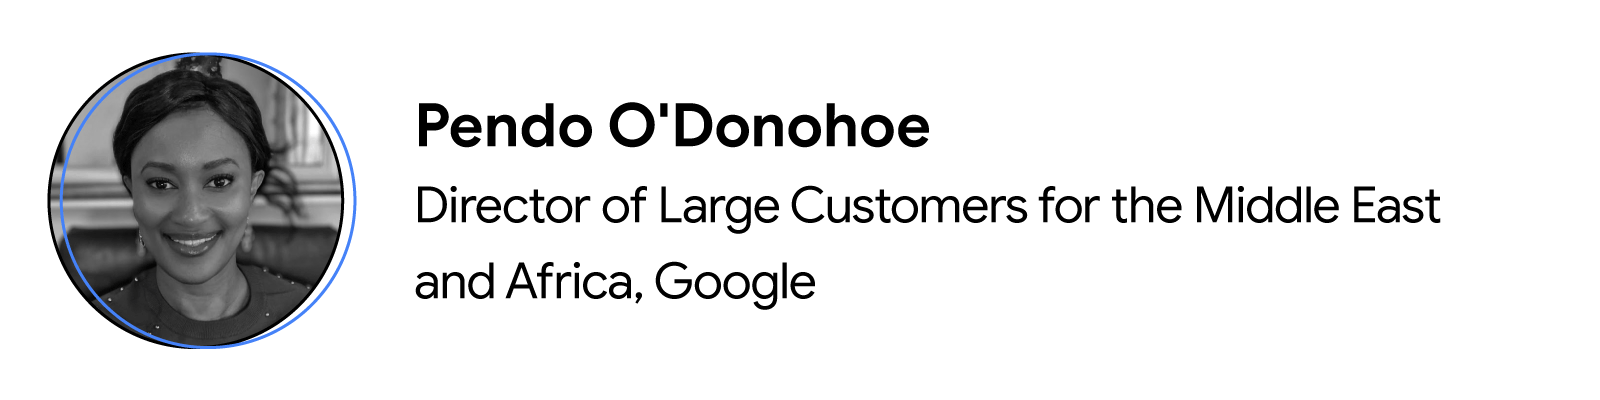 Black-and-white headshot of Pendo O’Donohoe, Director of Large Customers for the Middle East and Africa at Google.